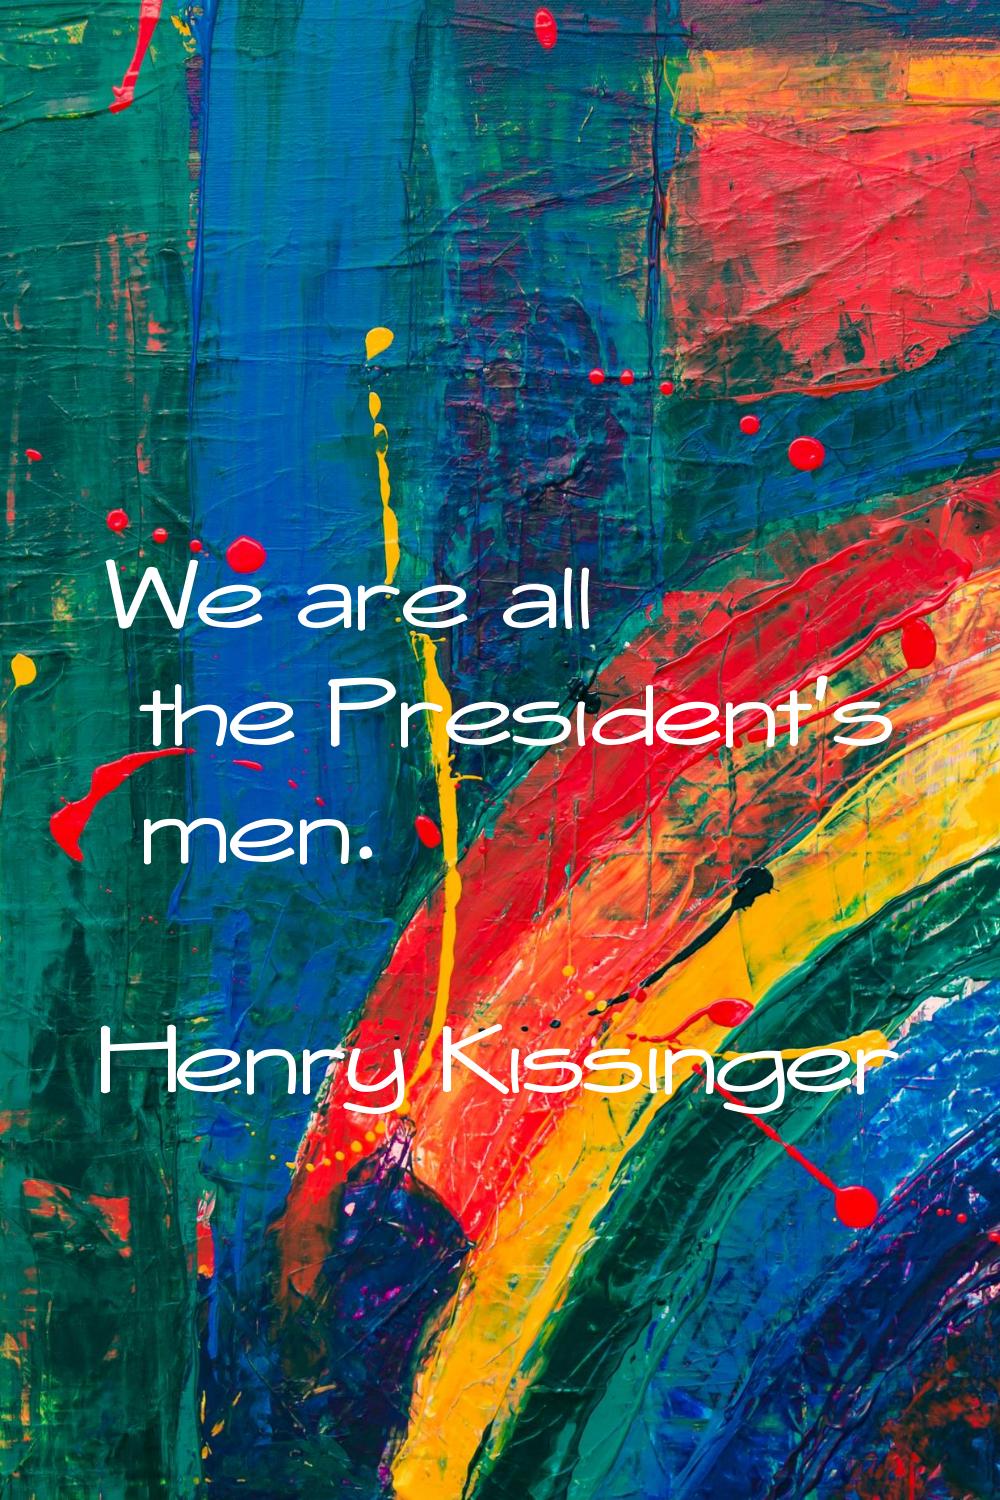 We are all the President's men.